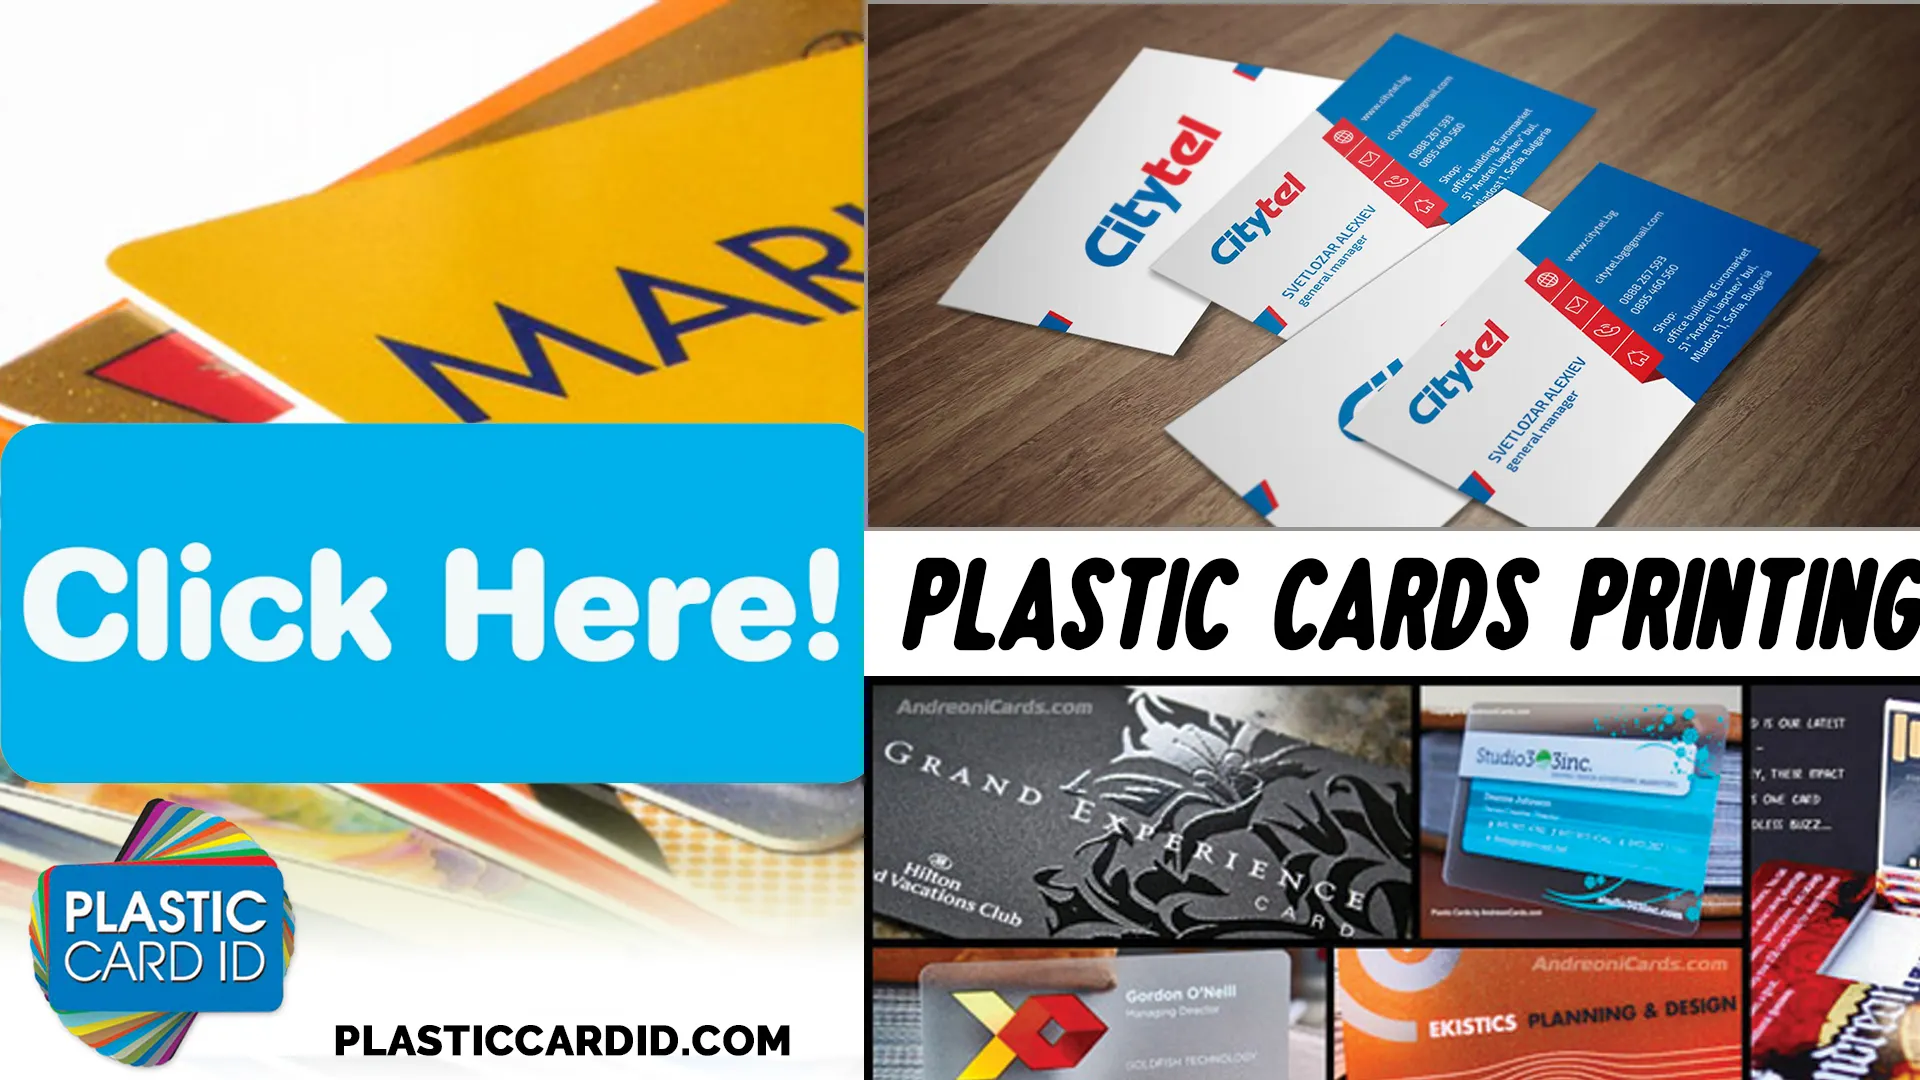 The Perfect Plastic Cards for Your Brand